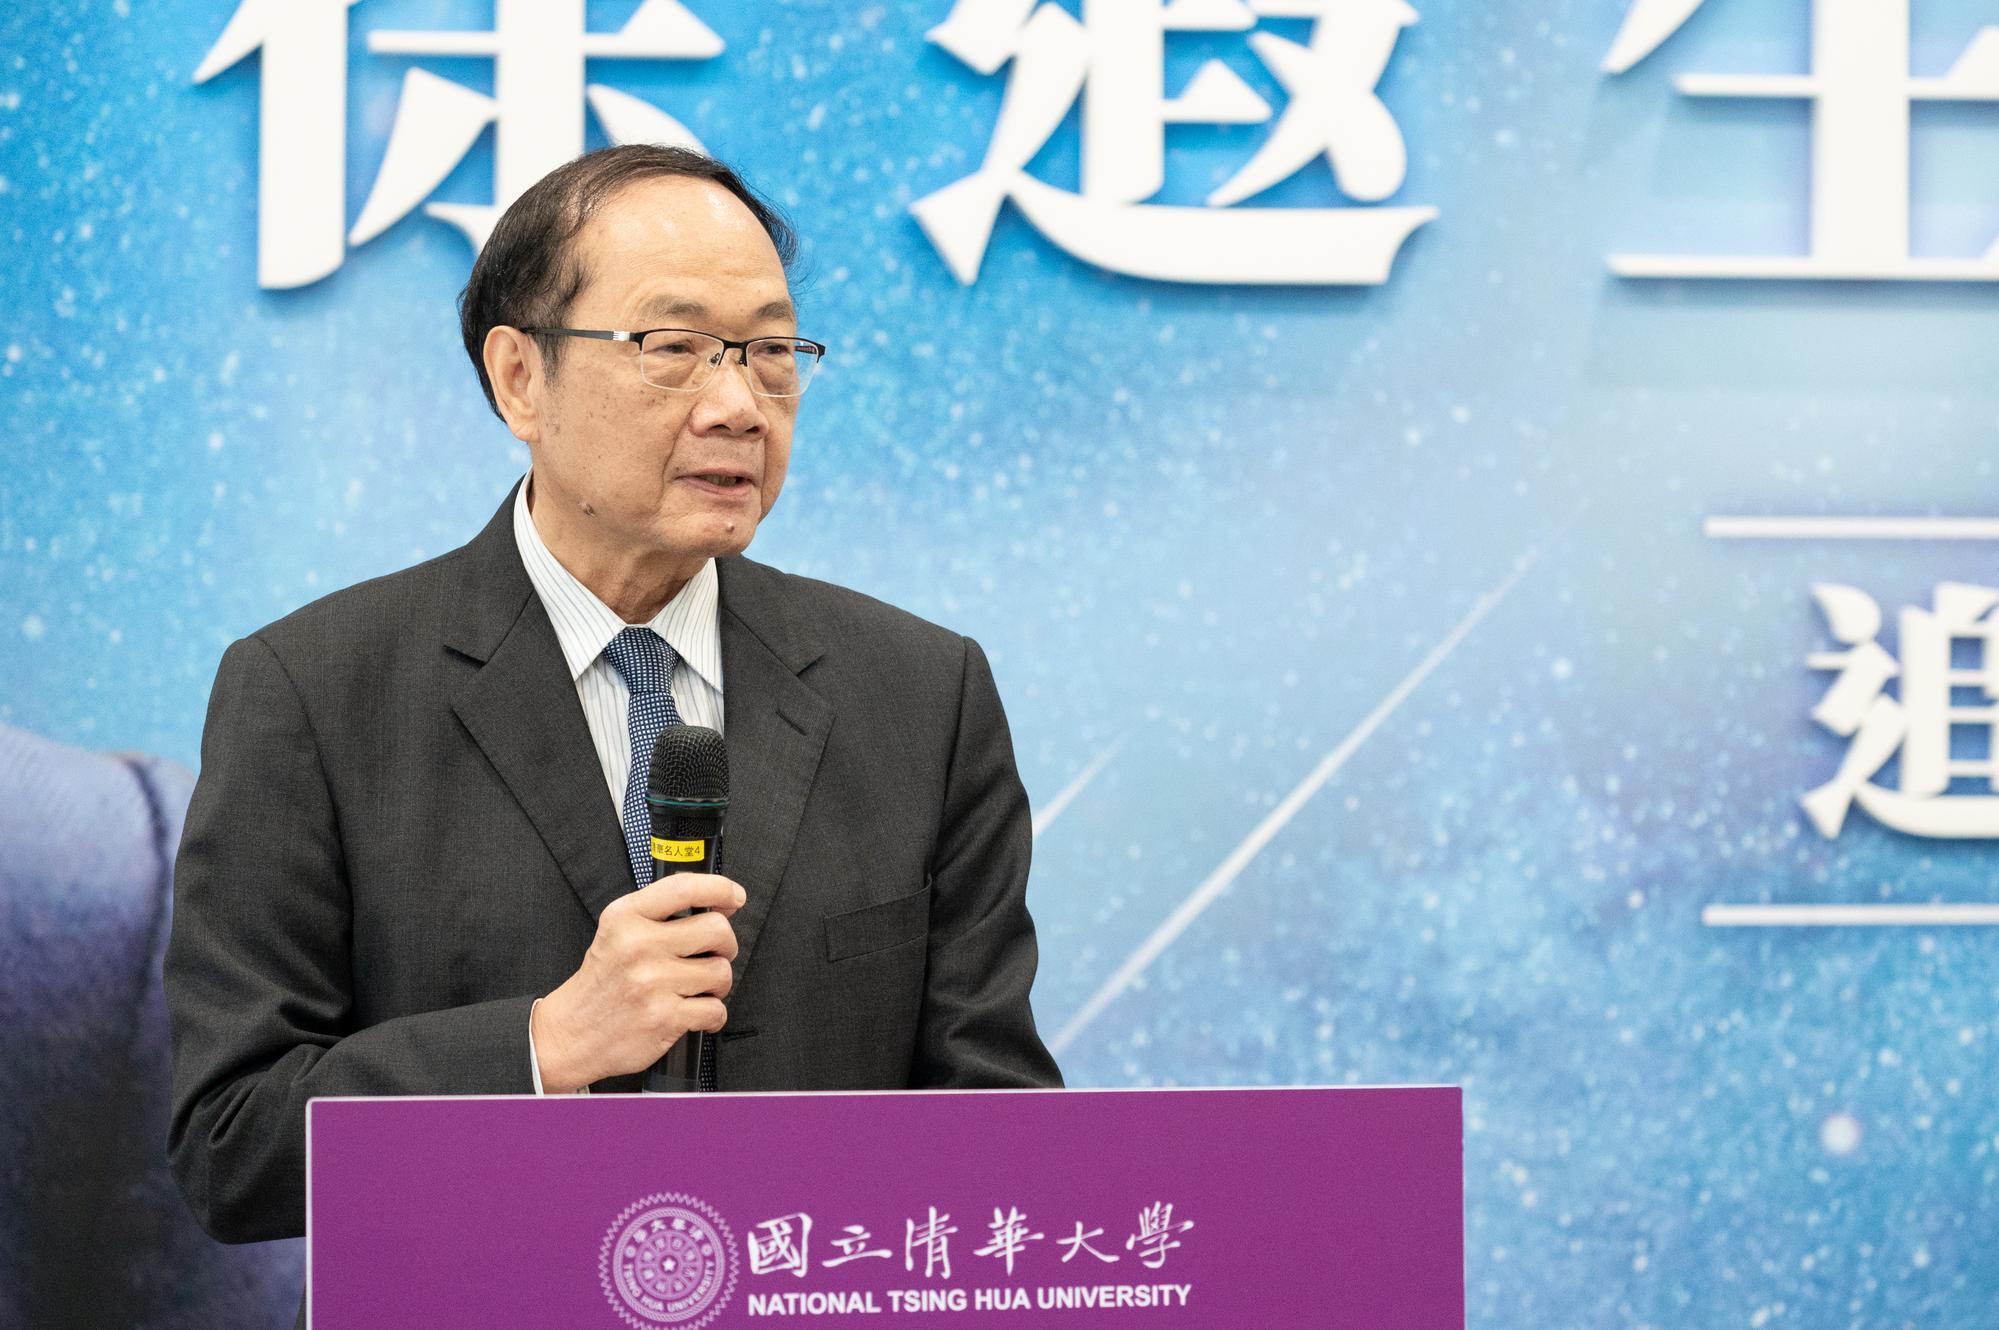 NTHU former President Wen-tsuen Chen (陳文村) stated that President-Emeritus Frank H. Shu (徐遐生) successfully secured a subsidy of NT$1 billion for NTHU from the government's “Aim for the Top University Project.”